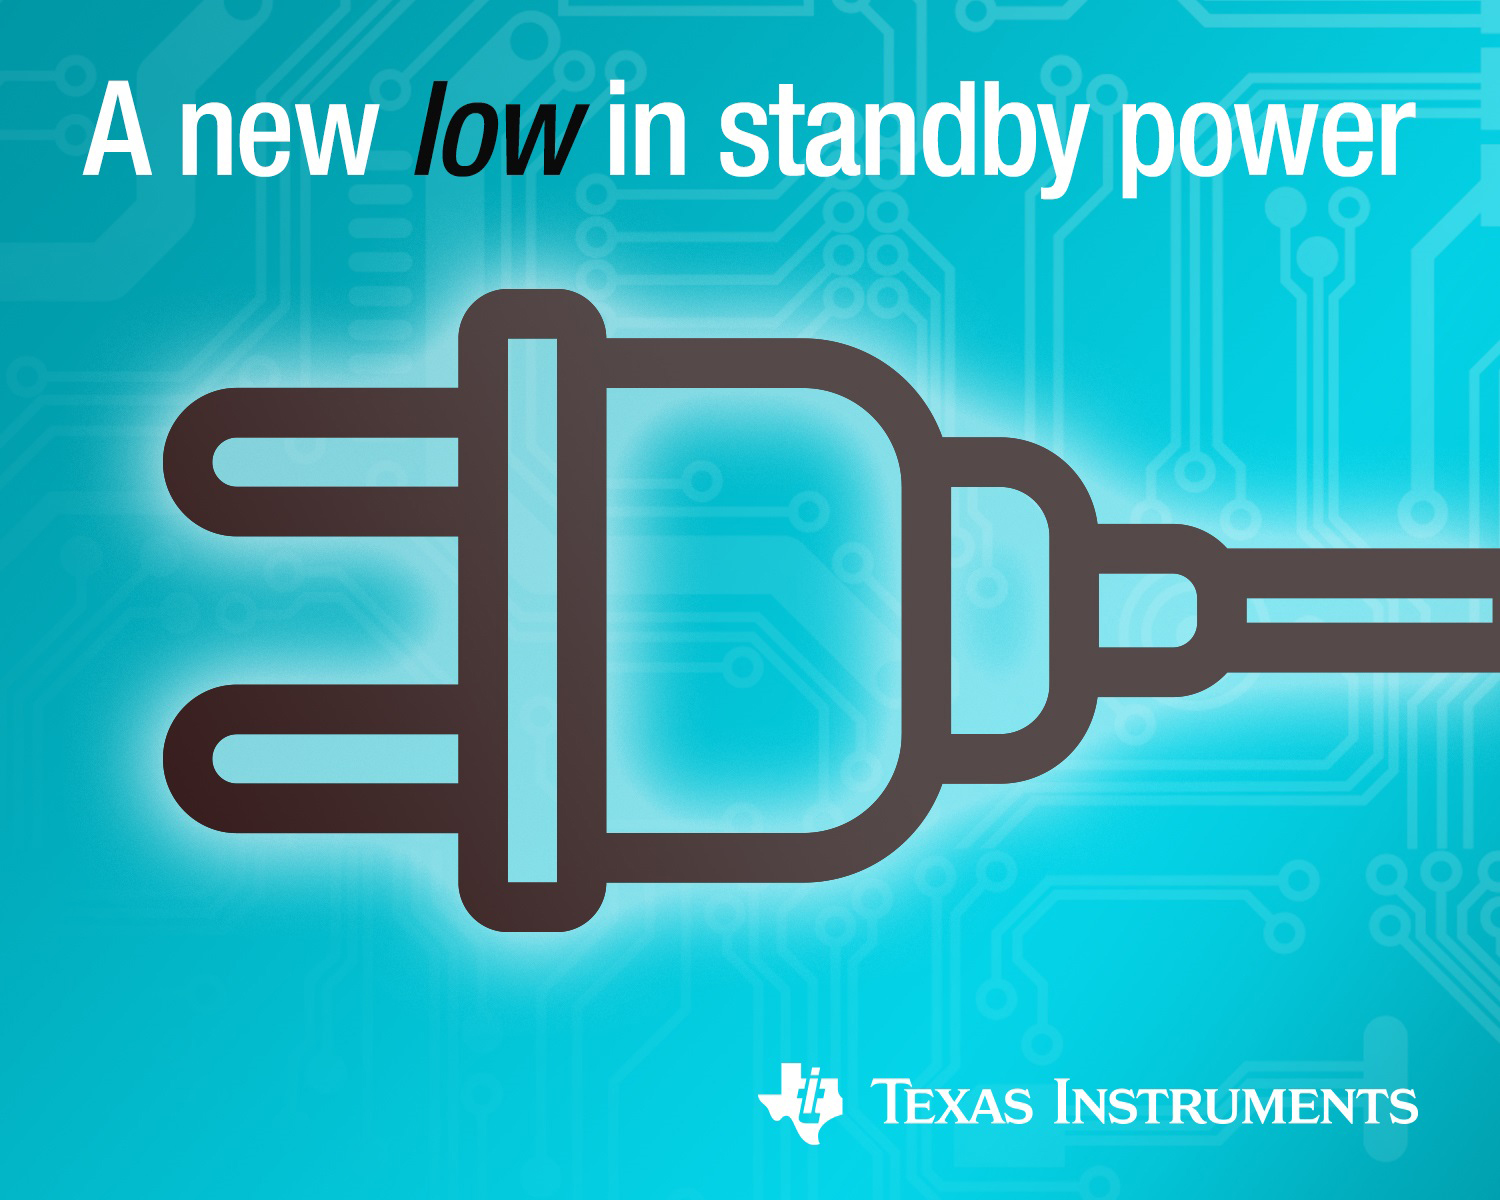 TI Enables Designers to Achieve a New Low in Standby Power